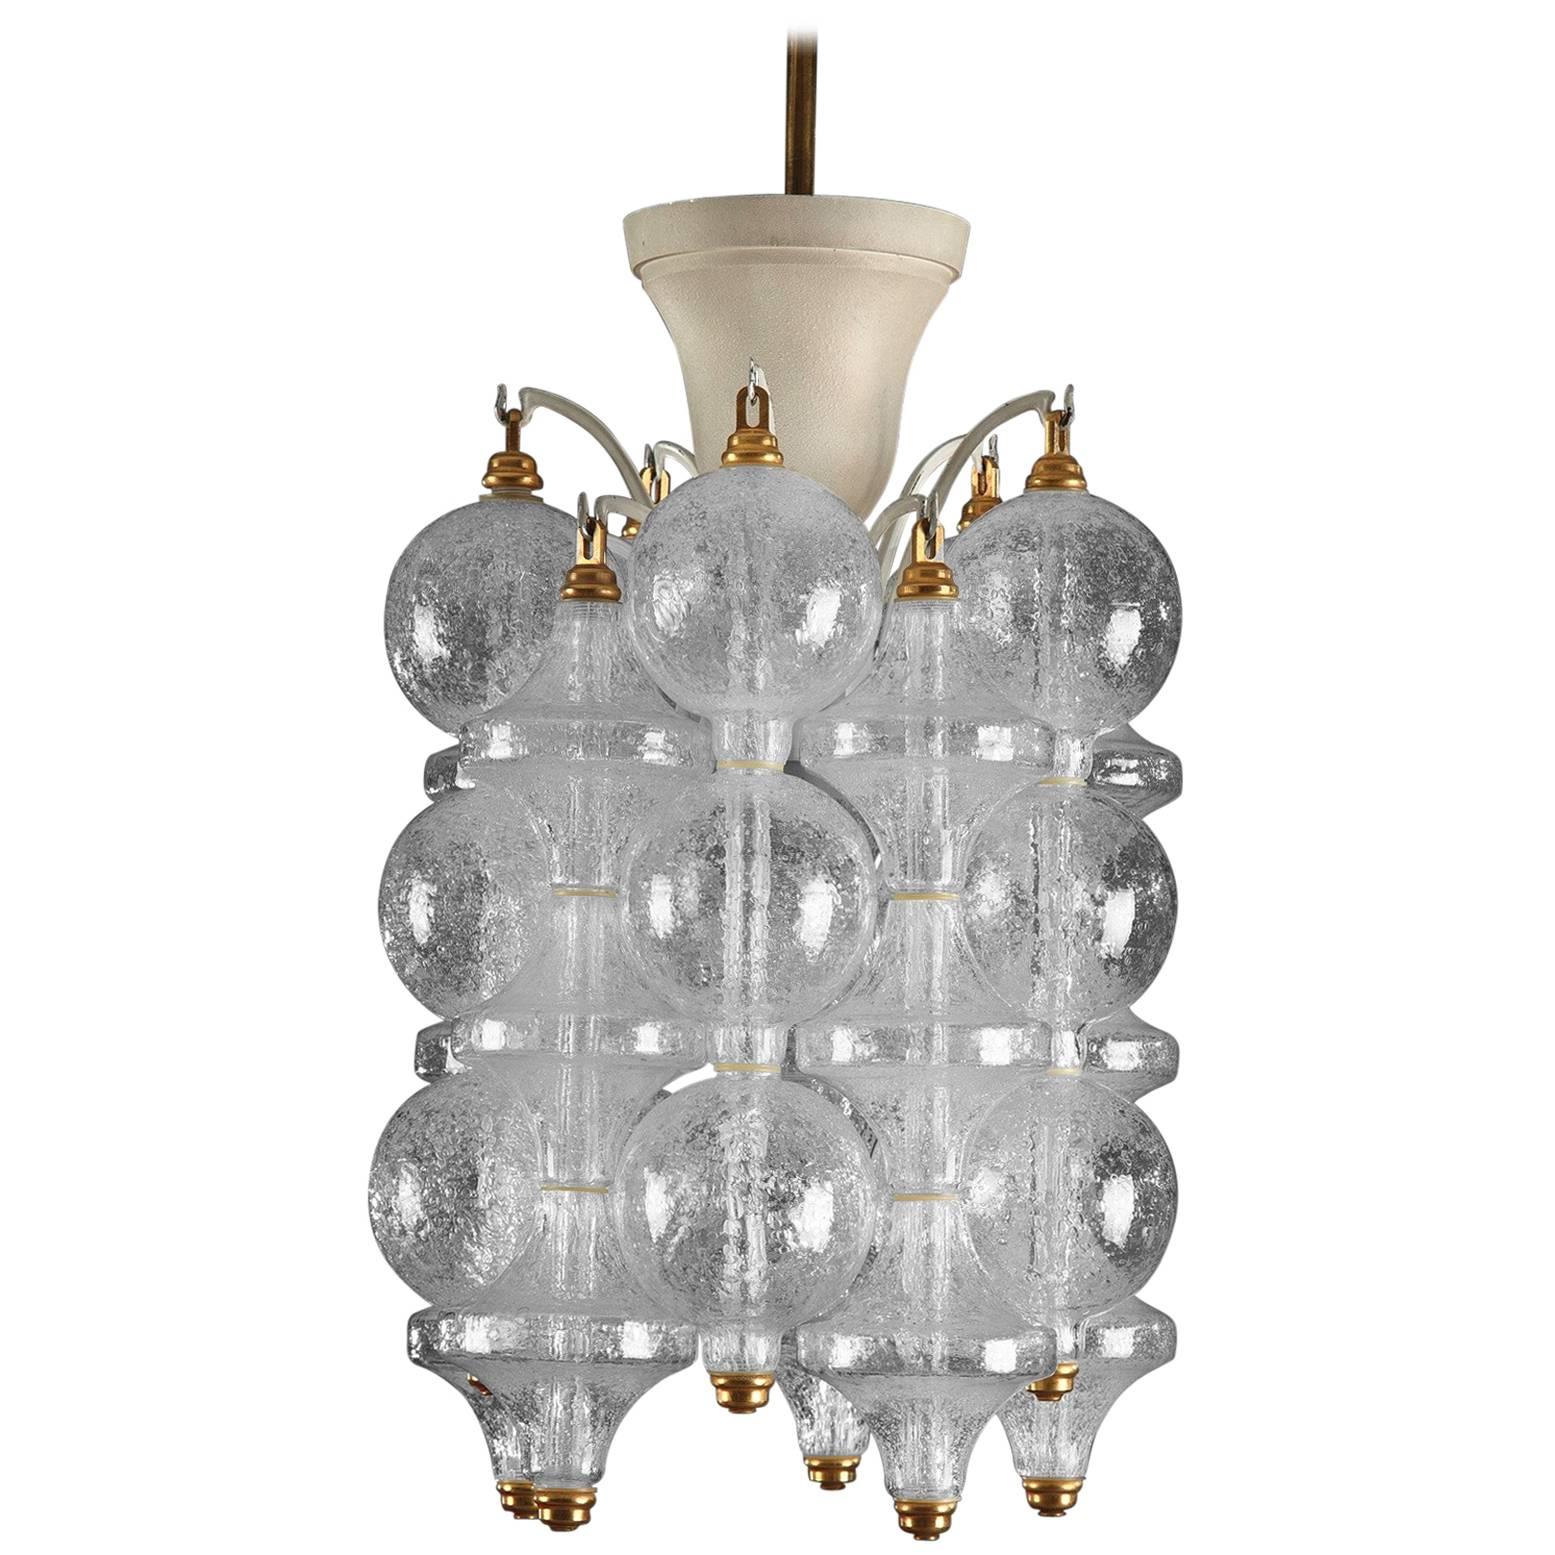 20th Century Lacquered Iron and Glass Chandelier in Venini Taste